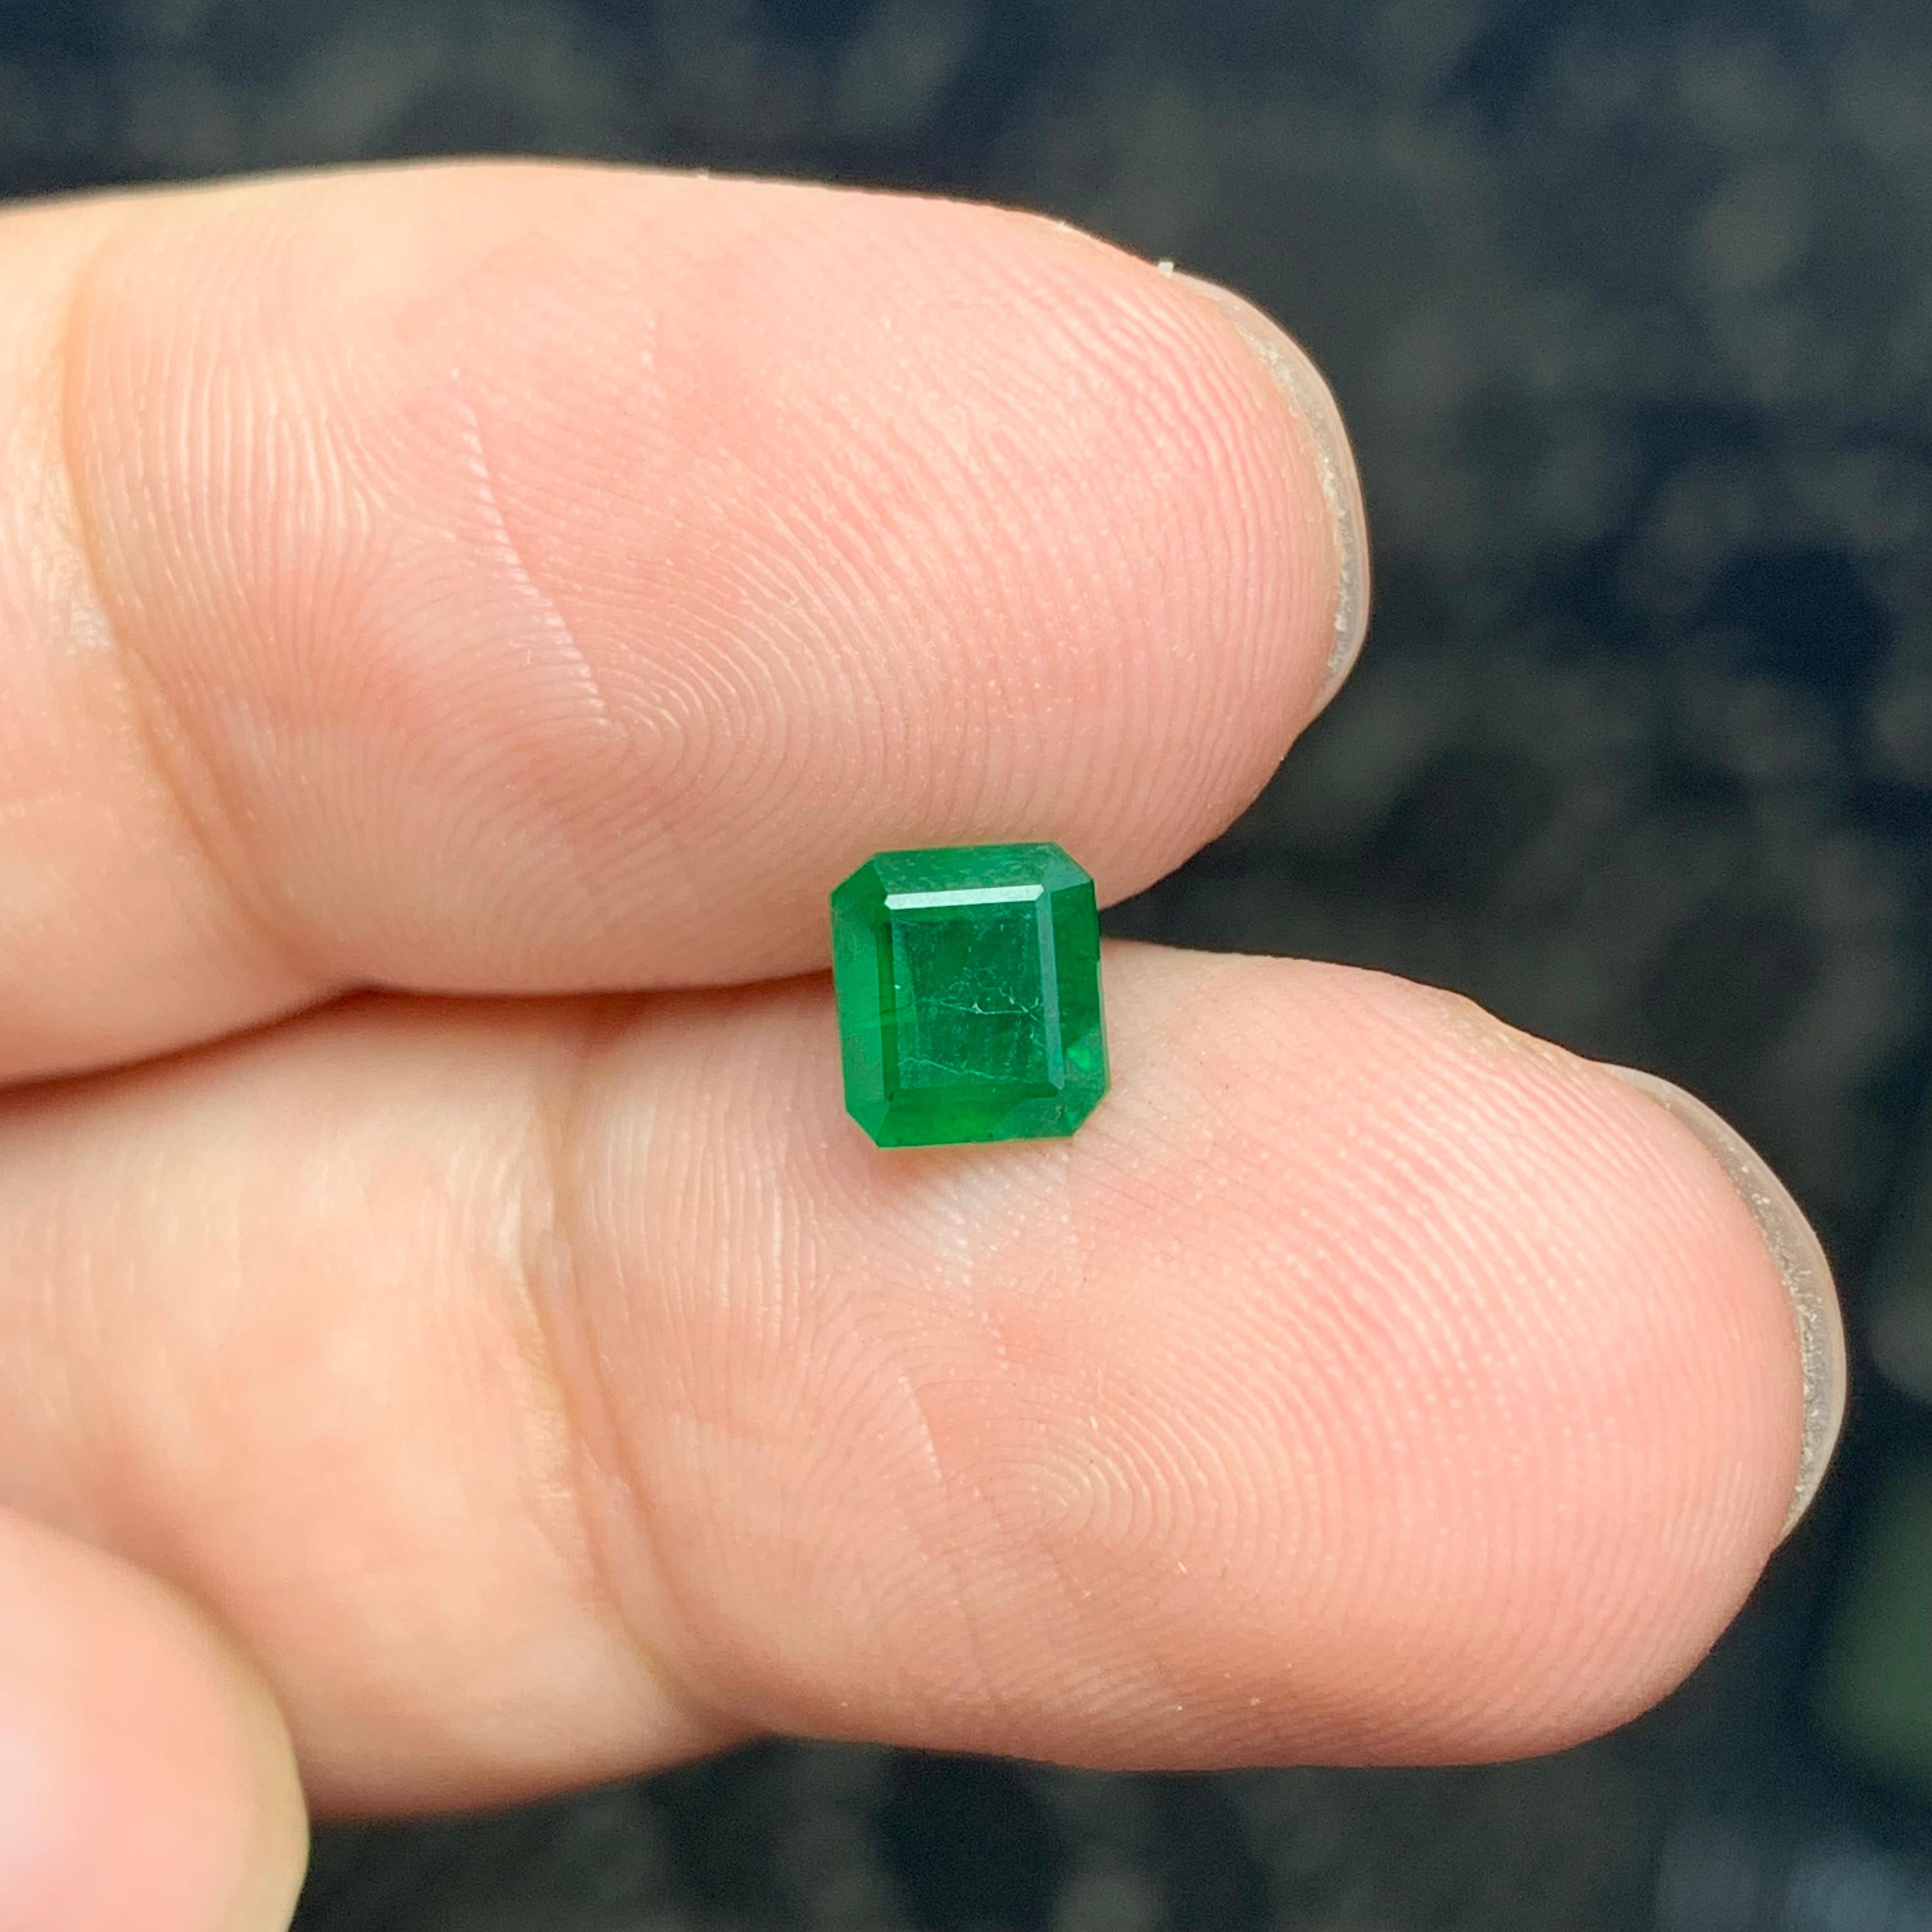 0.85 Carat Natural Loose Emerald Gemstone From Swat Mine, Pakistan  For Sale 1